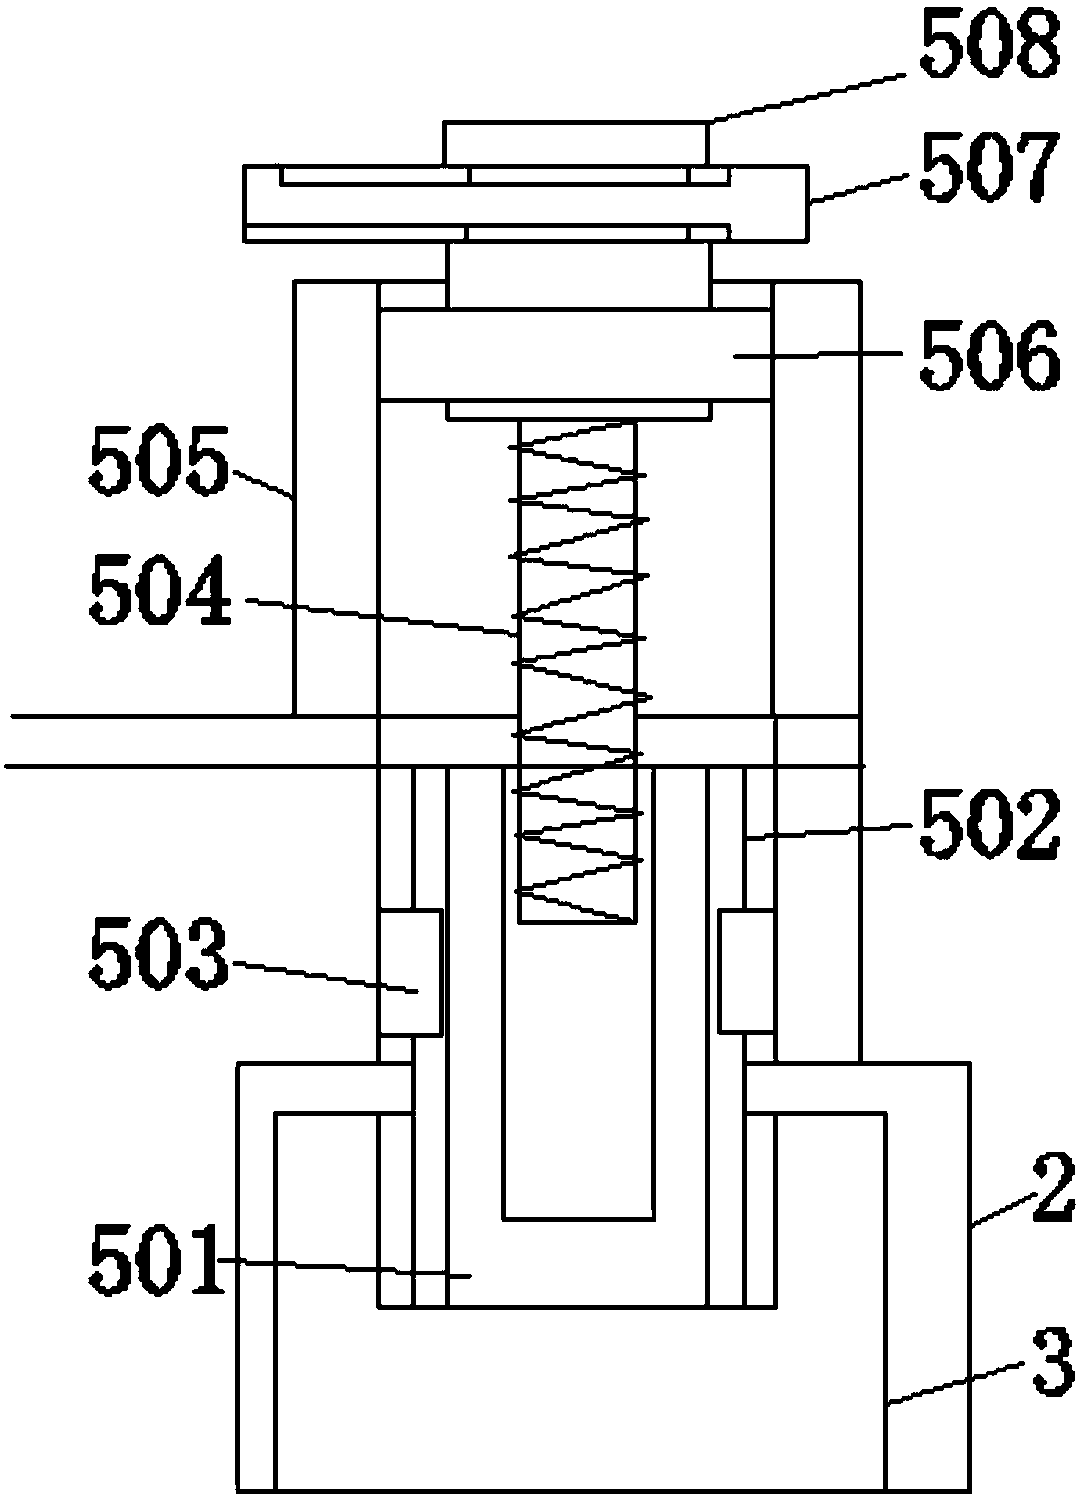 Water treatment self-cleaned filter for effectively reducing blocking